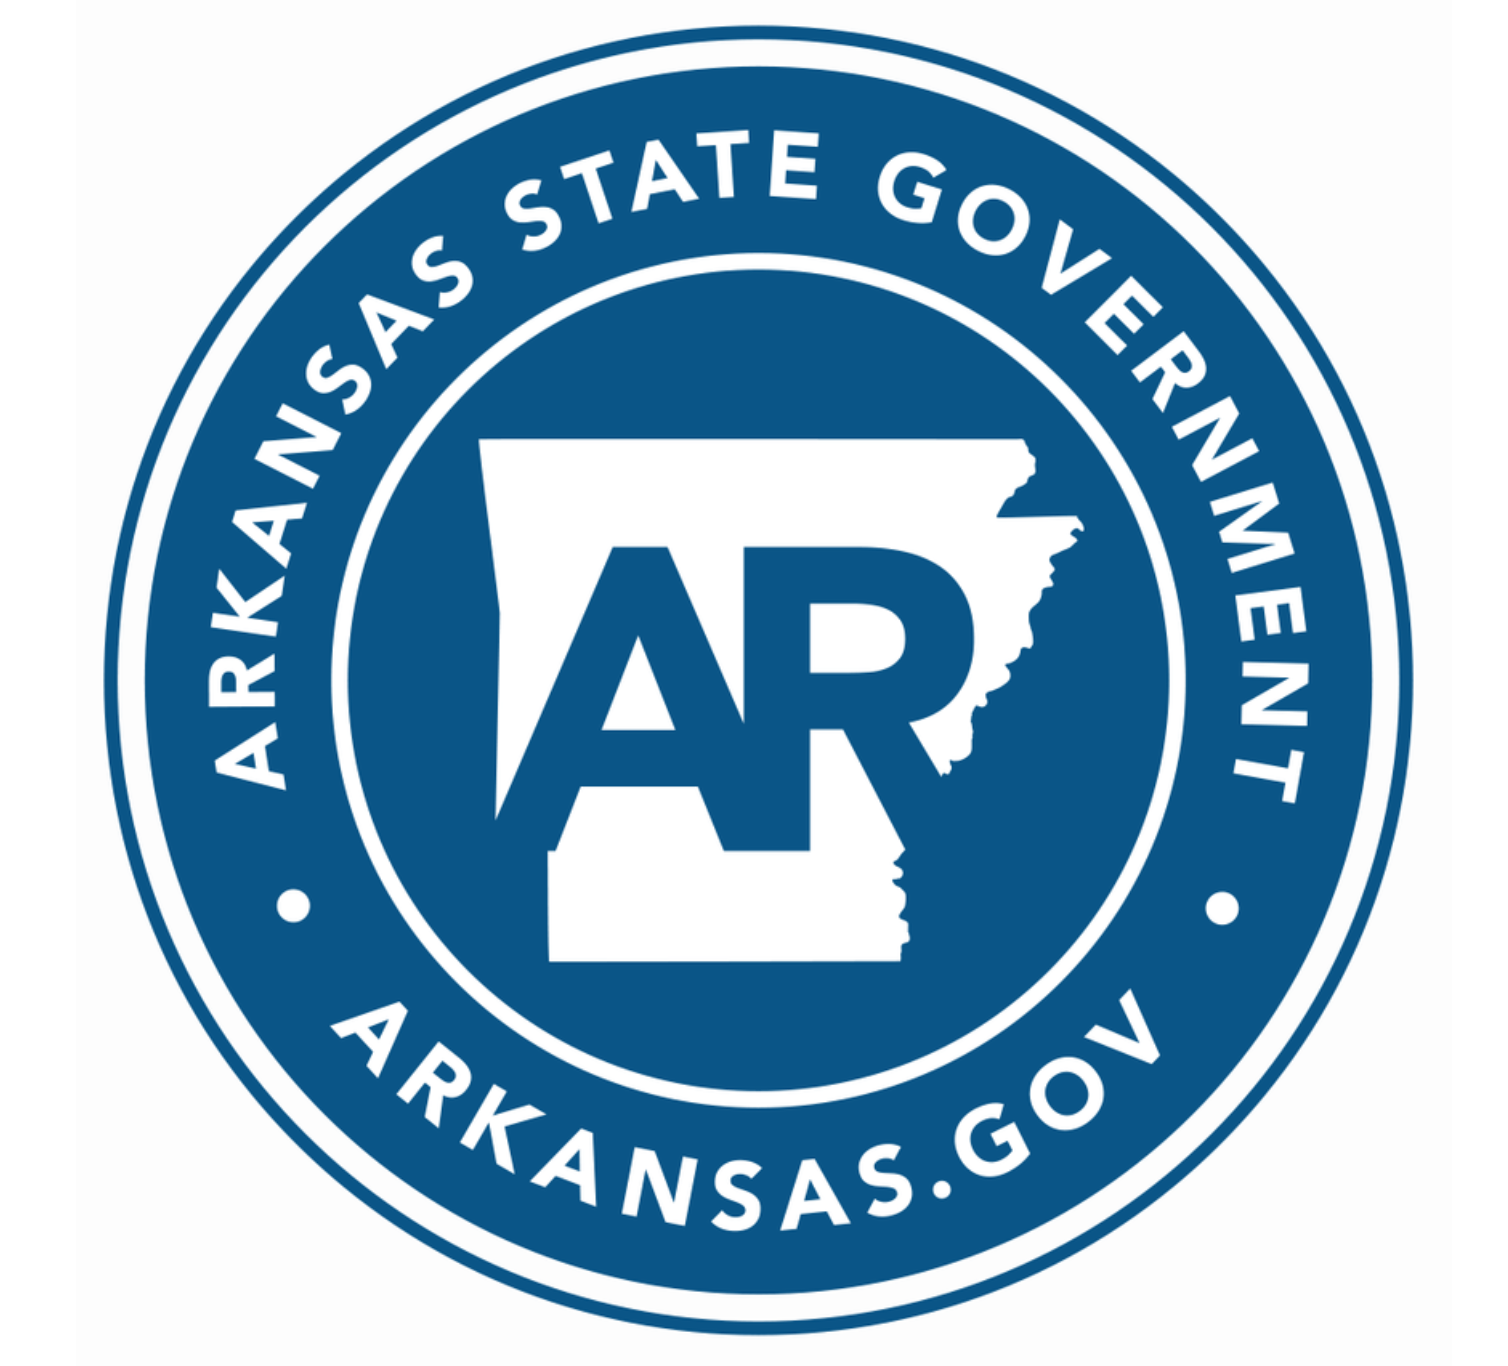 Arkansas - Personal Information Protection Act